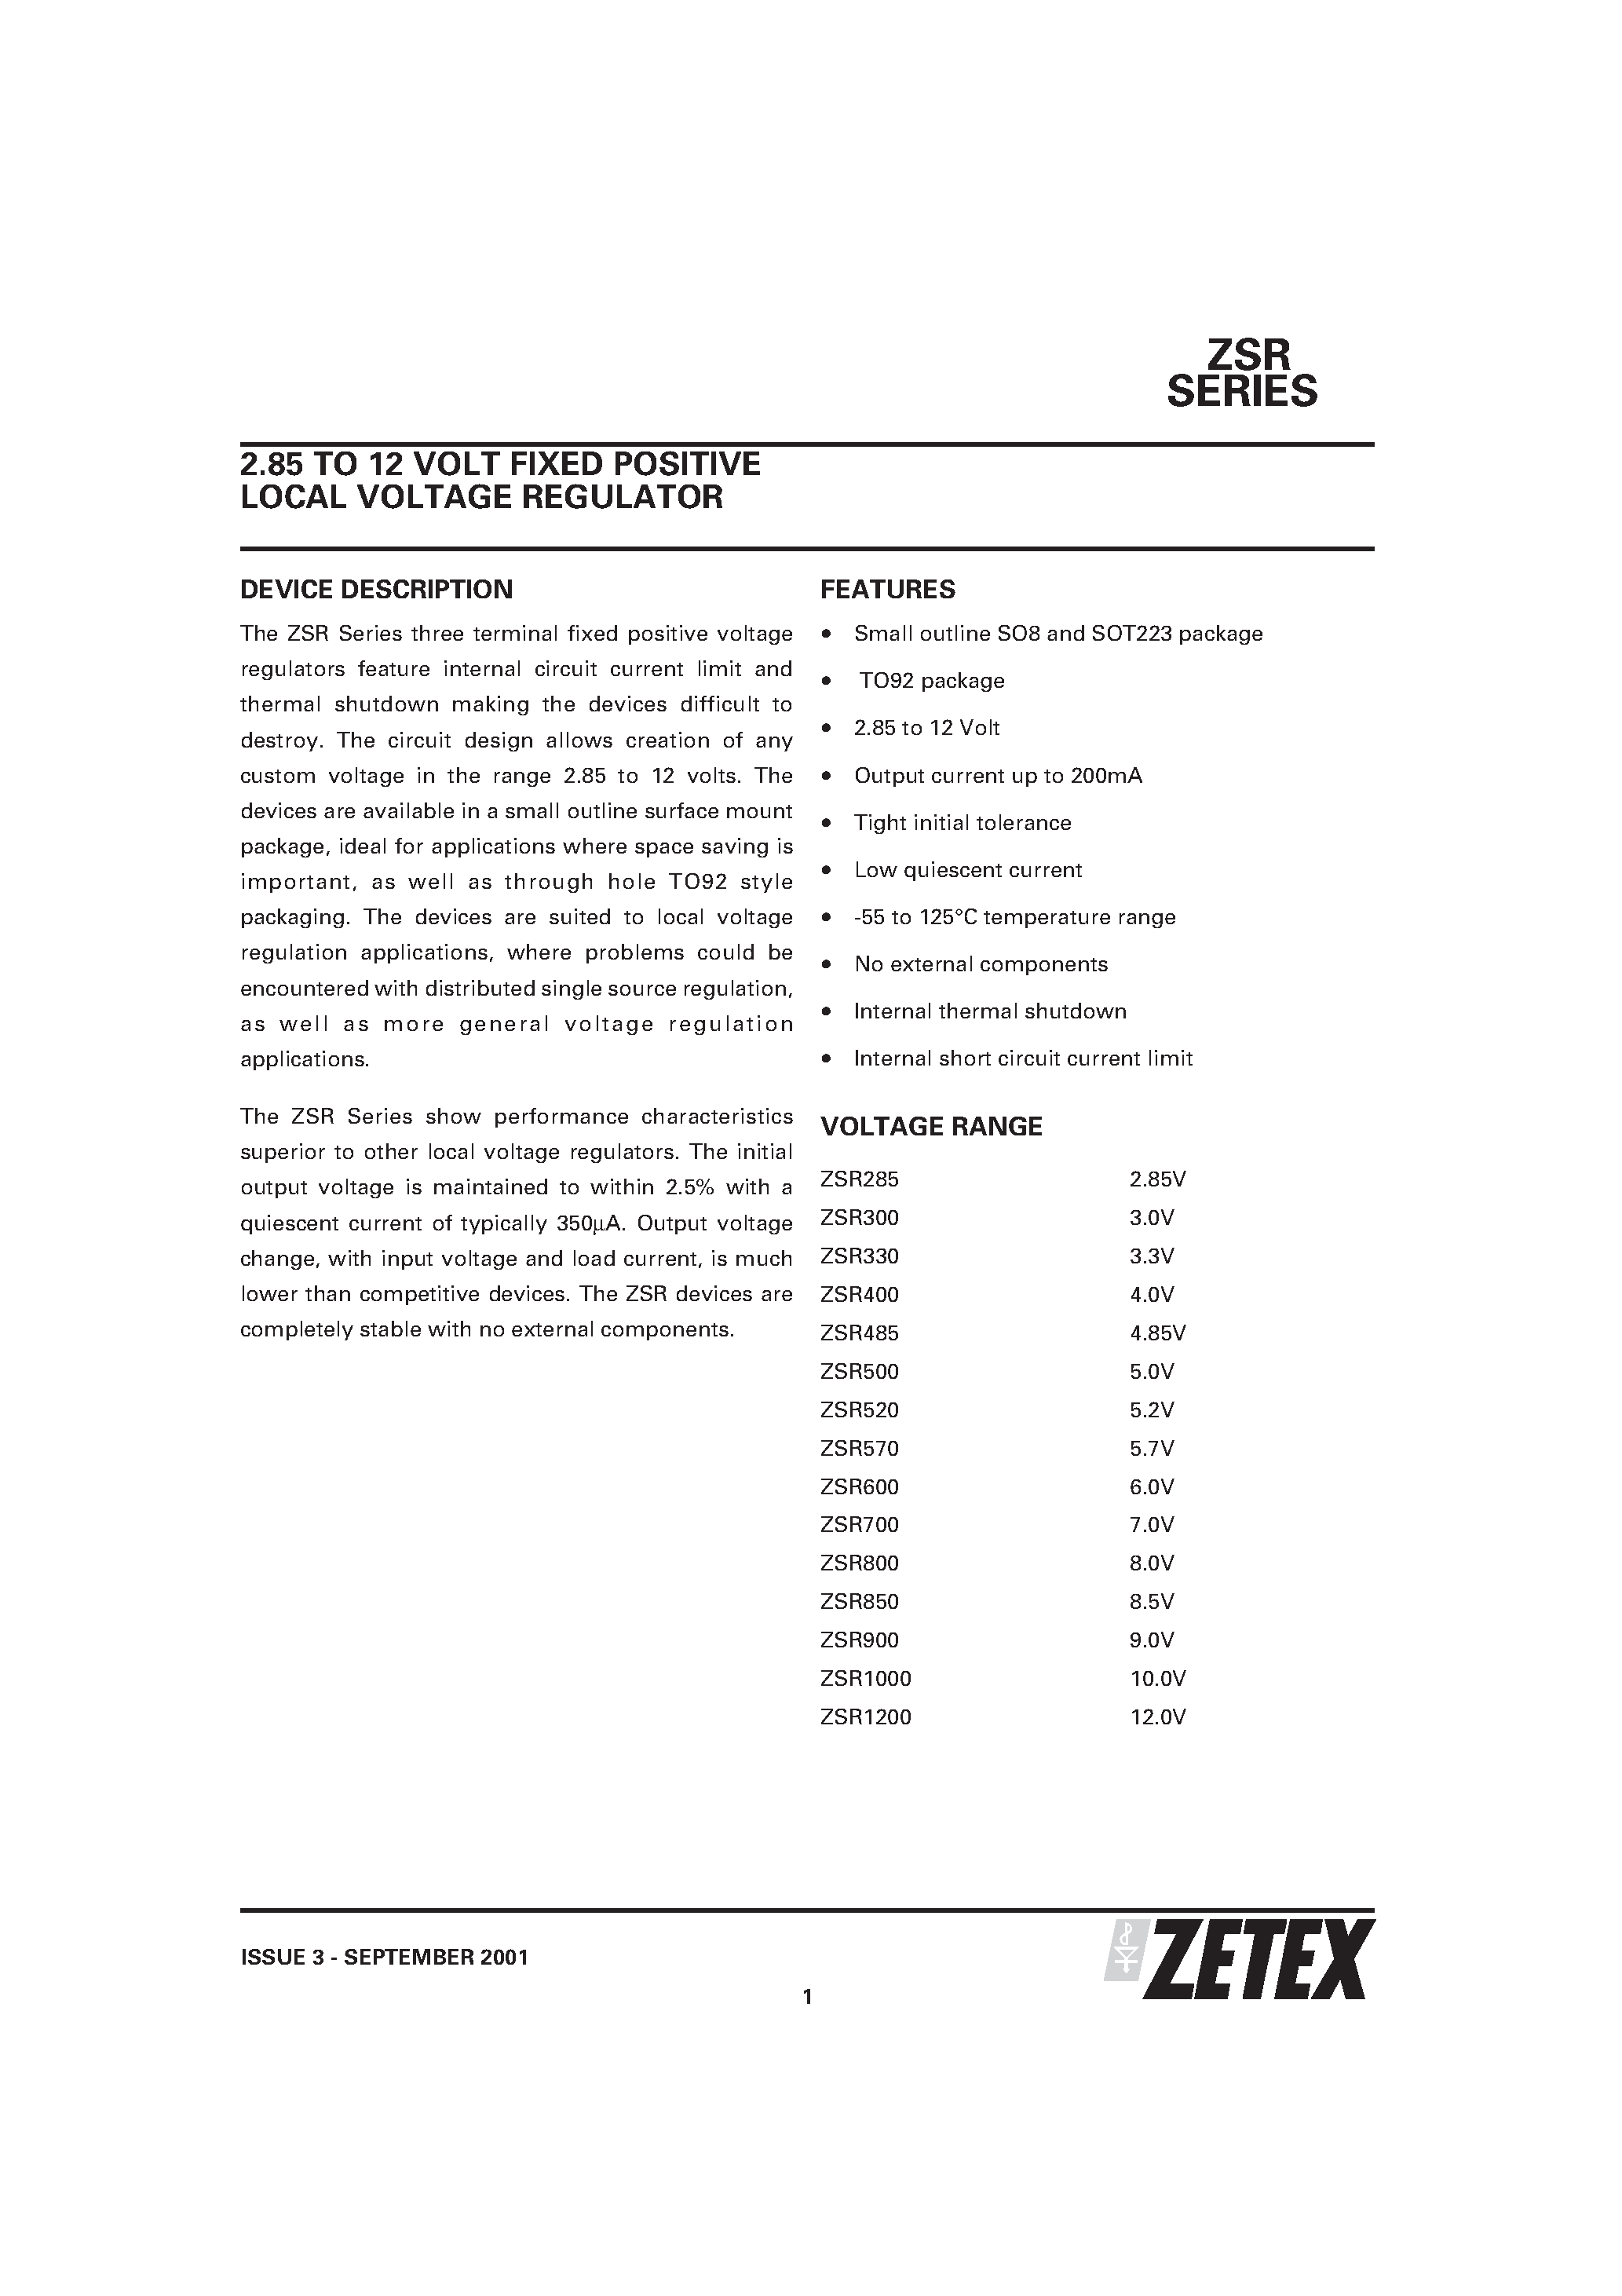 Datasheet ZSR485 - 2.85 TO 12 VOLT FIXED POSITIVE LOCAL VOLTAGE REGULATOR page 1